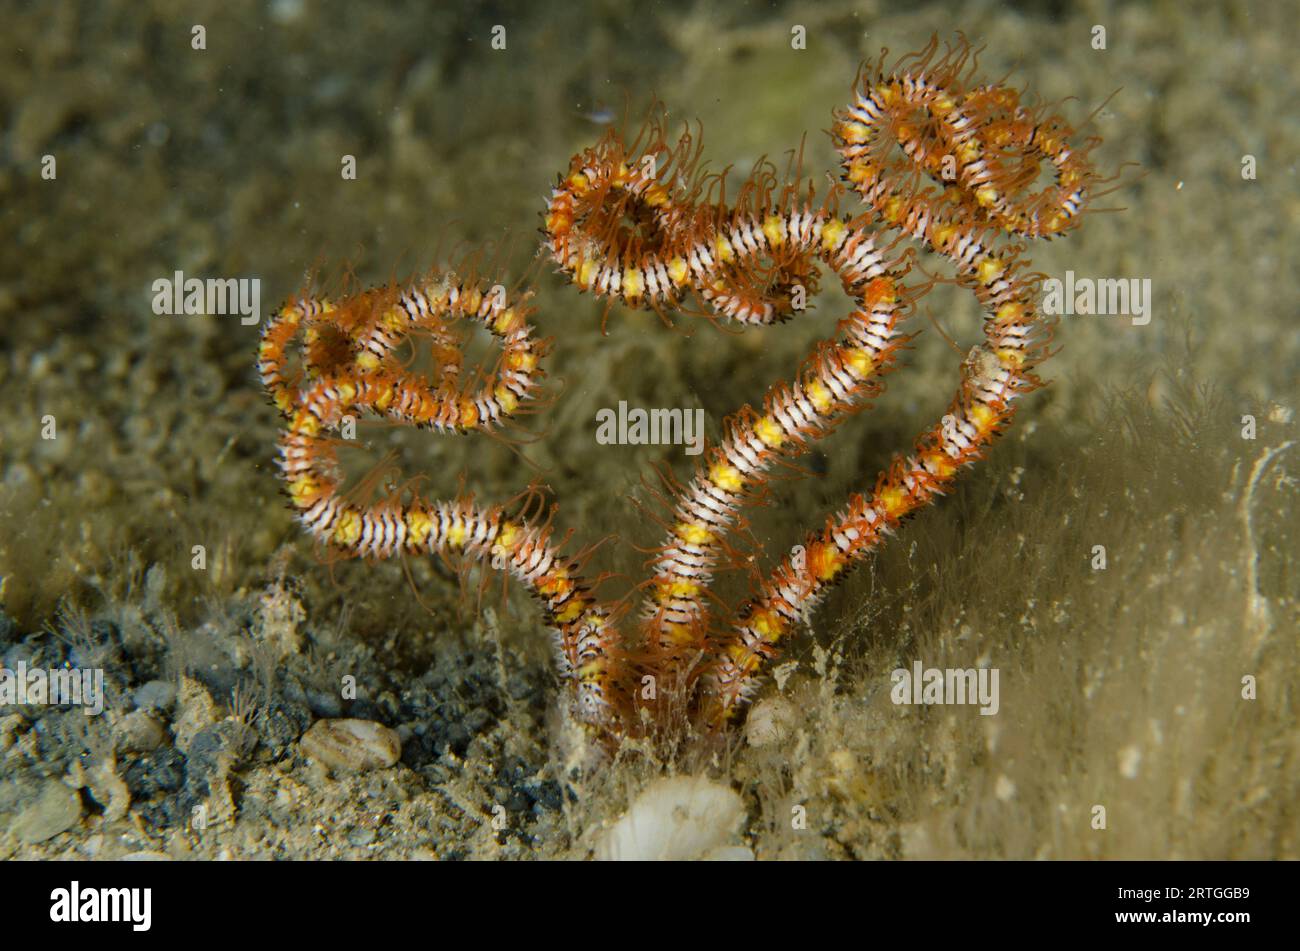 Burrowing Brittle Star, Amphiura sp, buried in sand, night dive, Dili Rock East dive site, Dili, East Timor Stock Photo